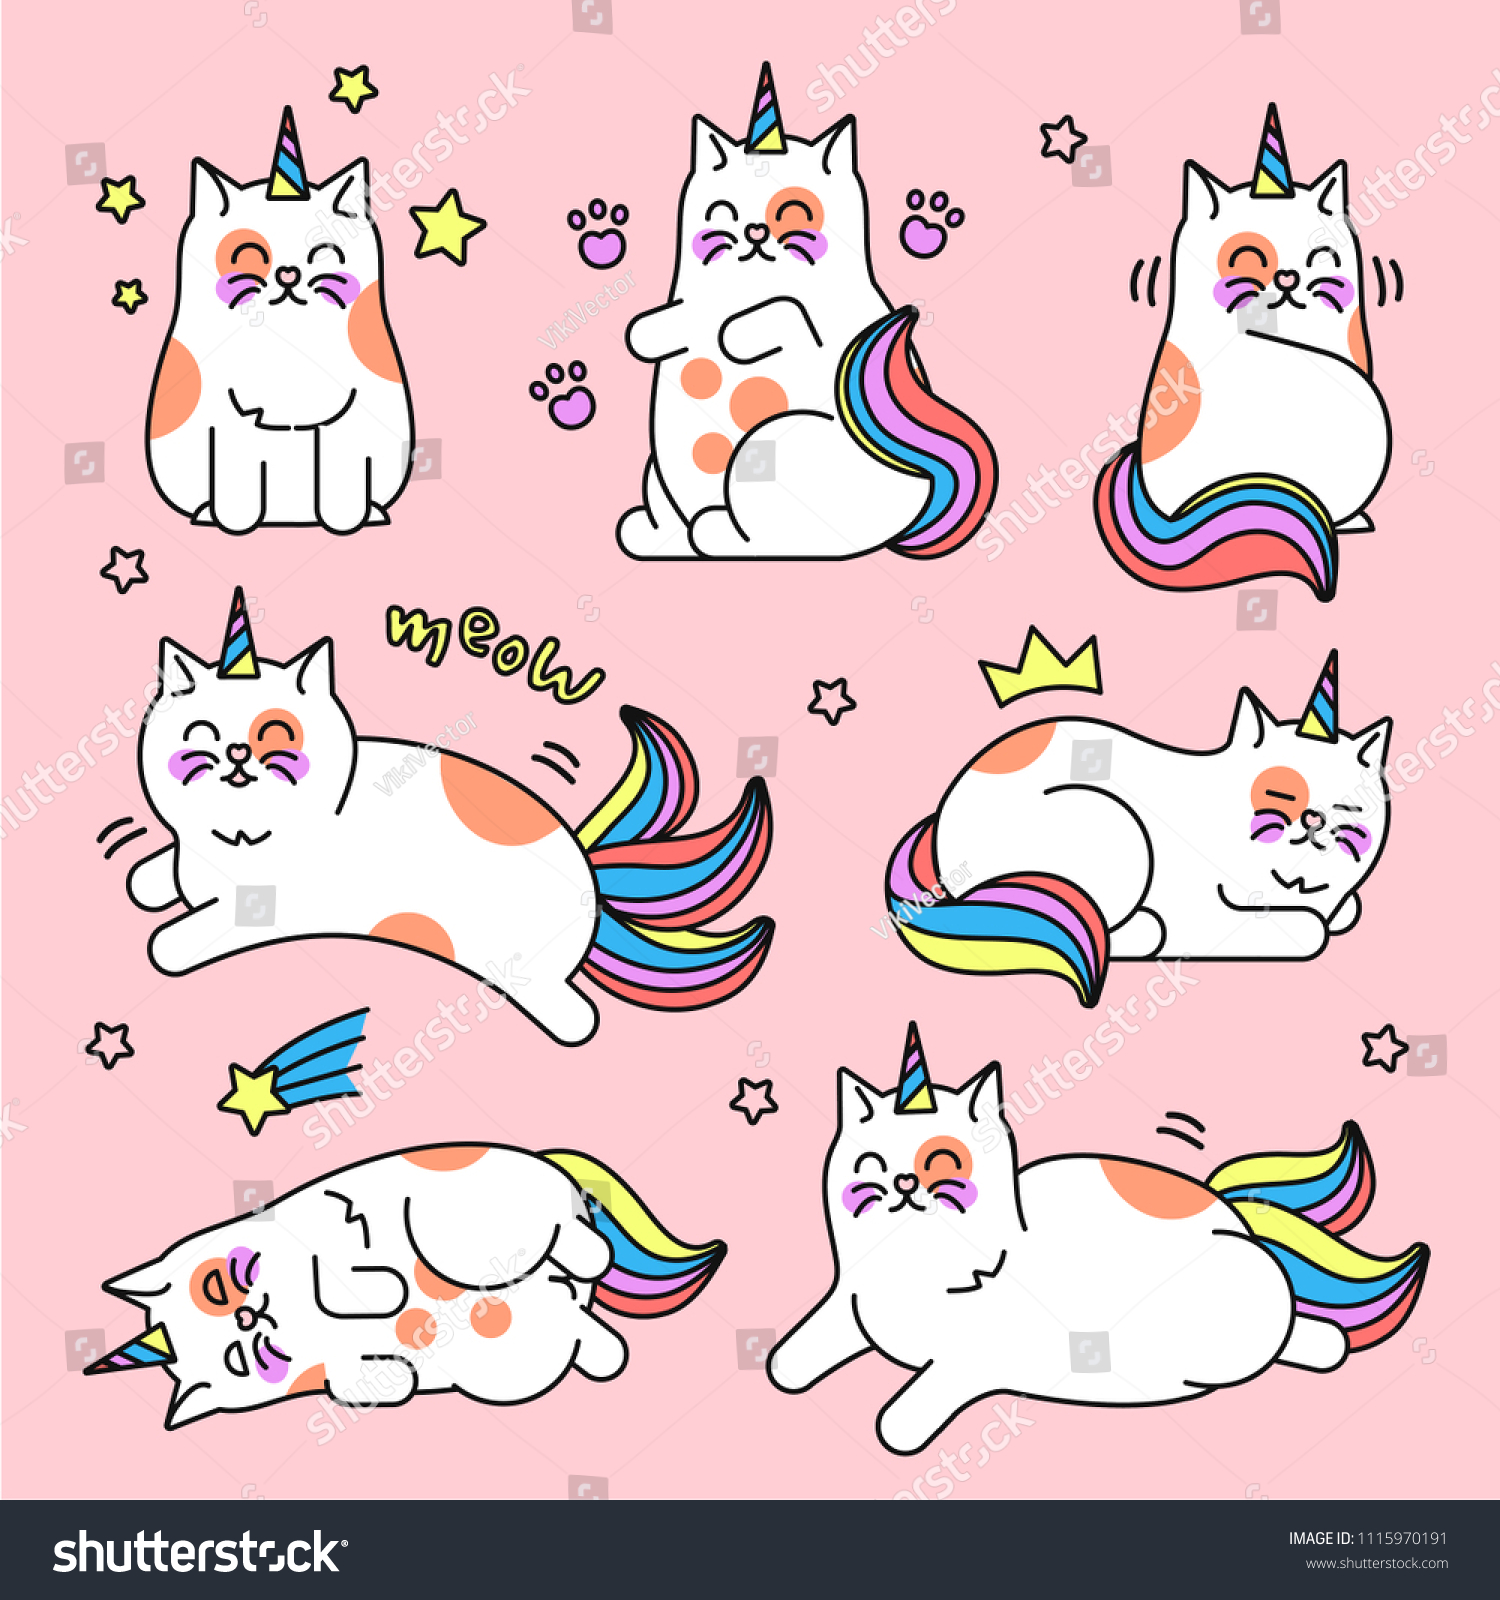 SVG of Cat unicorn set. Pretty caticorn, cute mystical animal, with rainbow tail and a single horn. Vector flat style cartoon magical cat illustration isolated on pink background svg